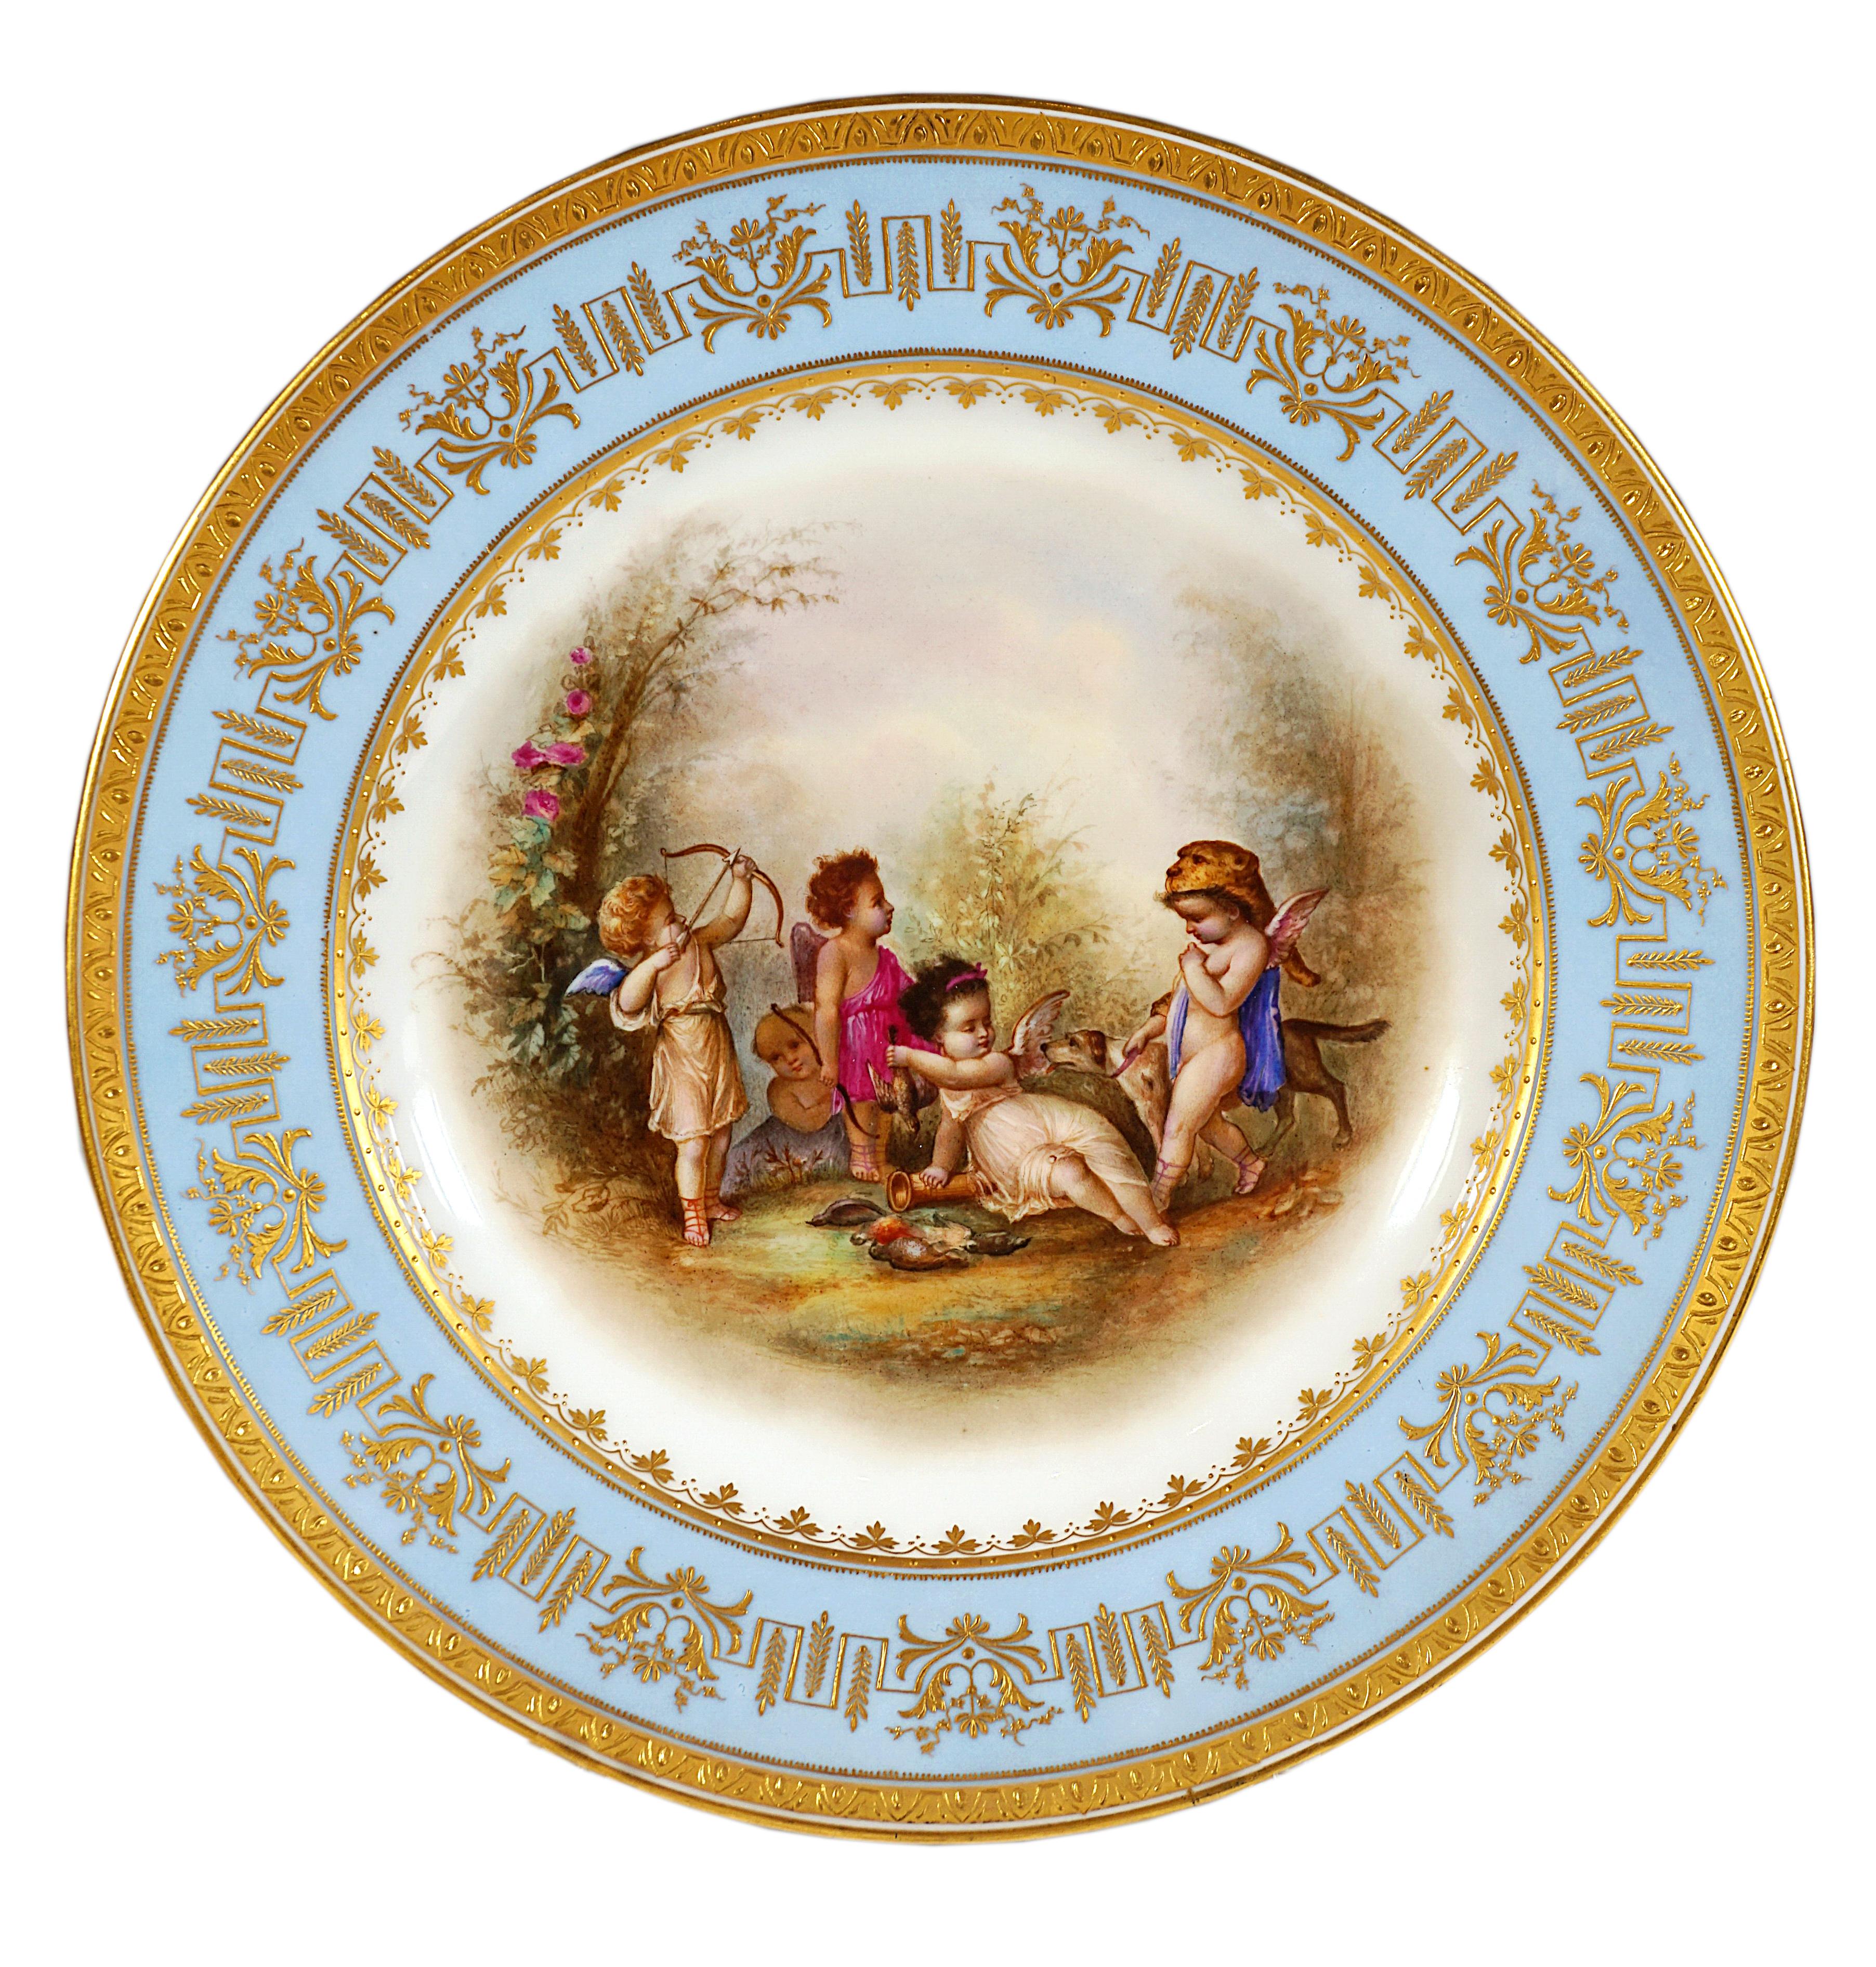 Viennese Imperial Porcelain Splendour Plate, Playing Cupids As Hunters, 1805